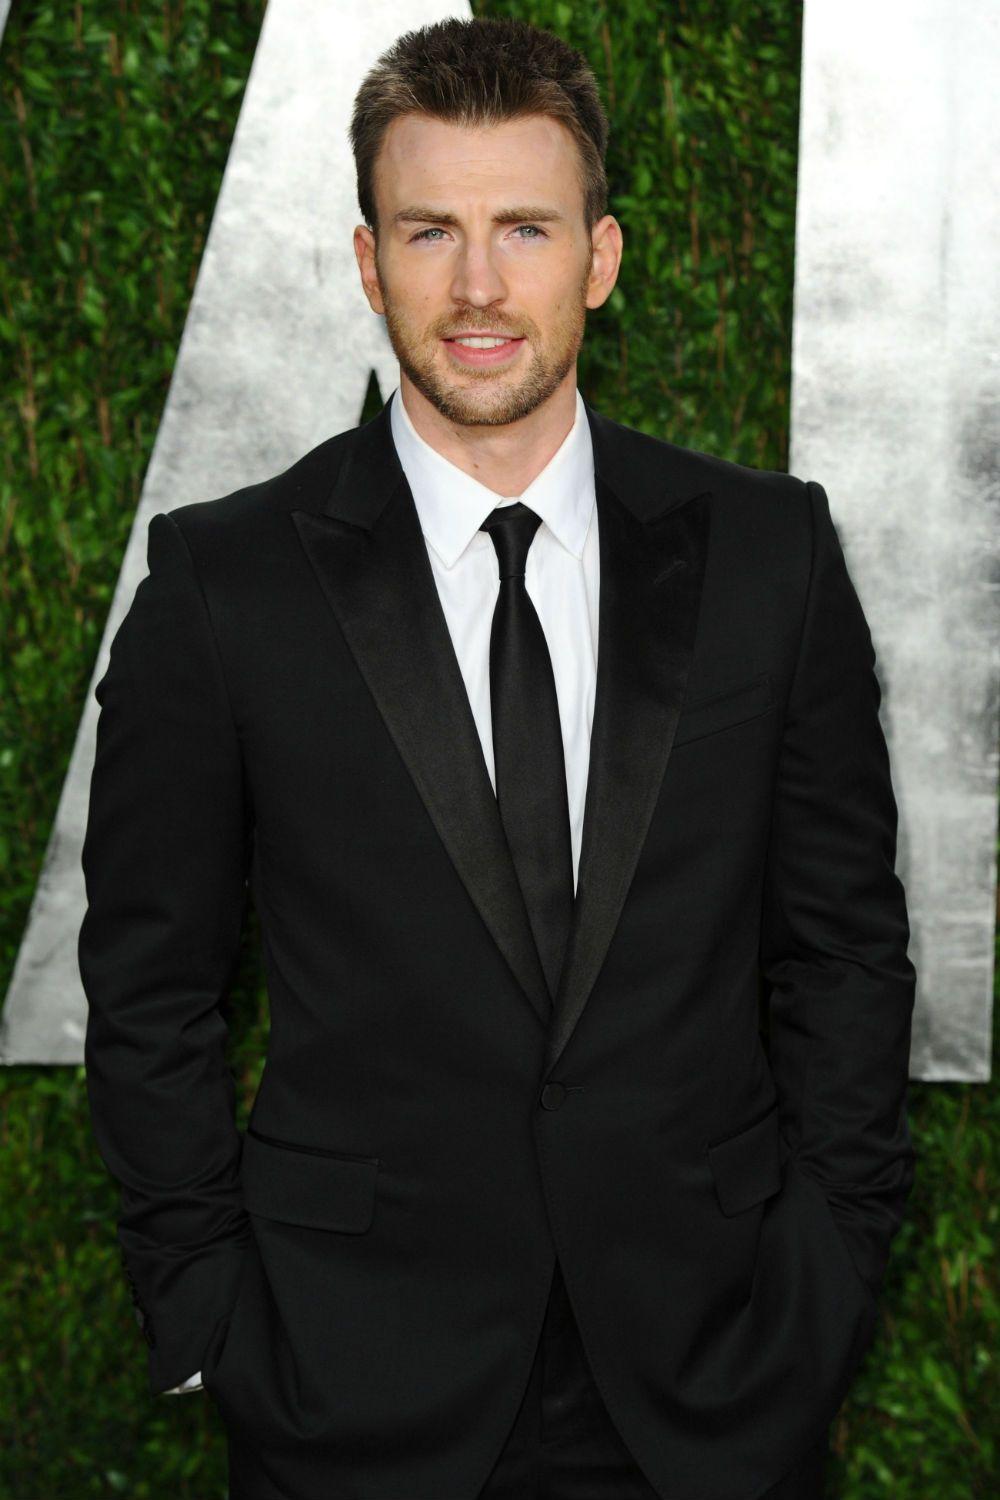 Gucci Heartthrob Chris Evans Tells Marie Claire The Real Way to His